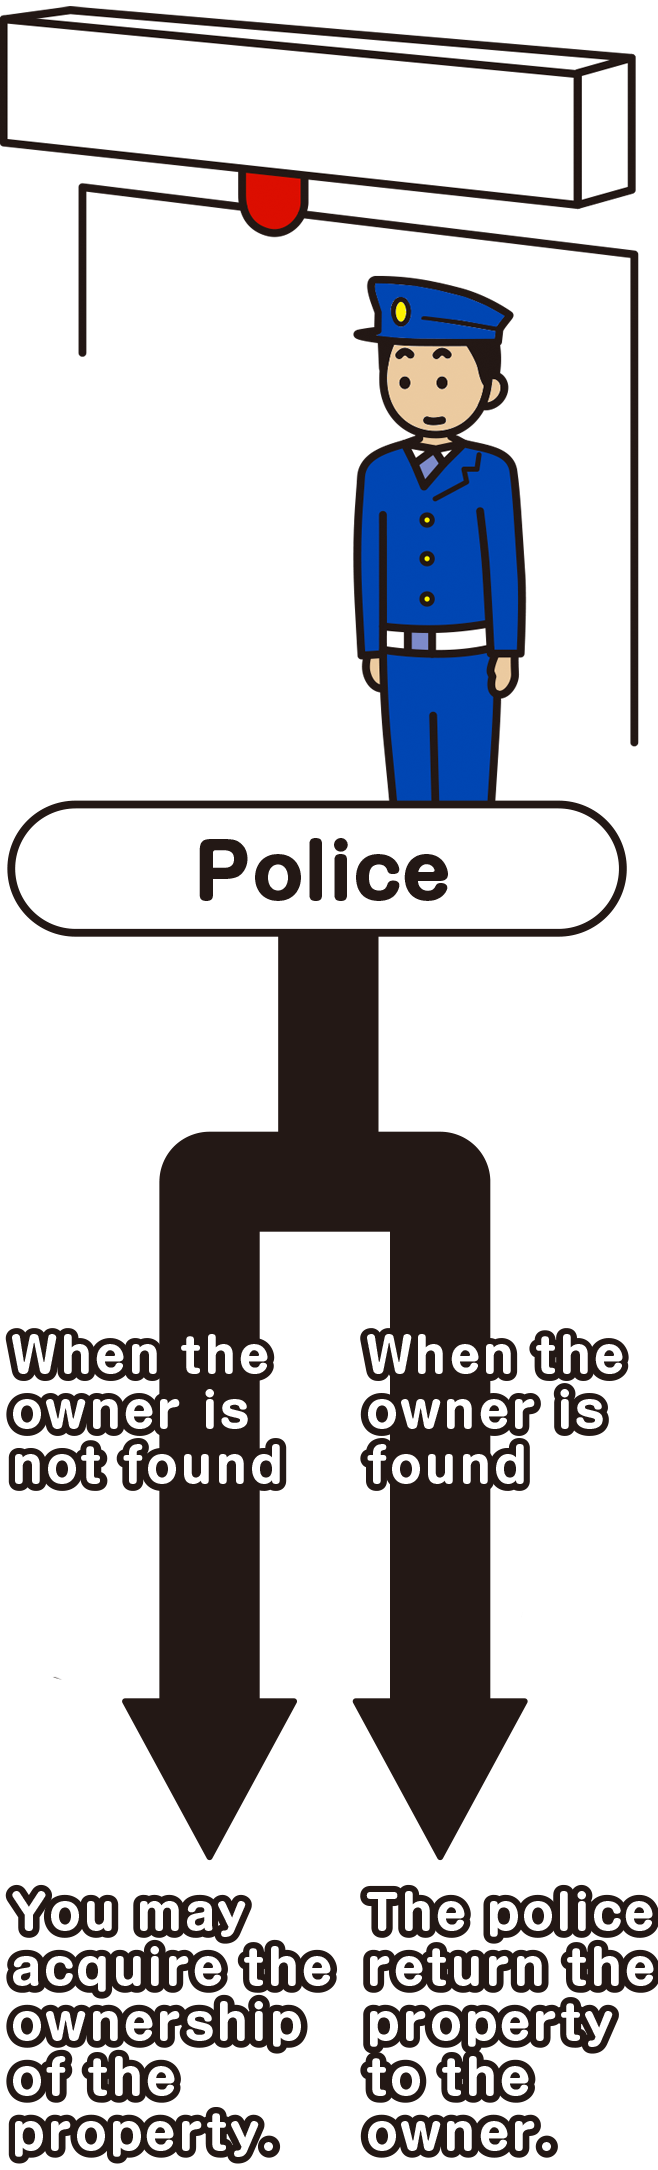 Police station or police box, etc.　When the owner is not found,You may acquire the ownership of the property.　When the owner is found, The police return the property to the owner.